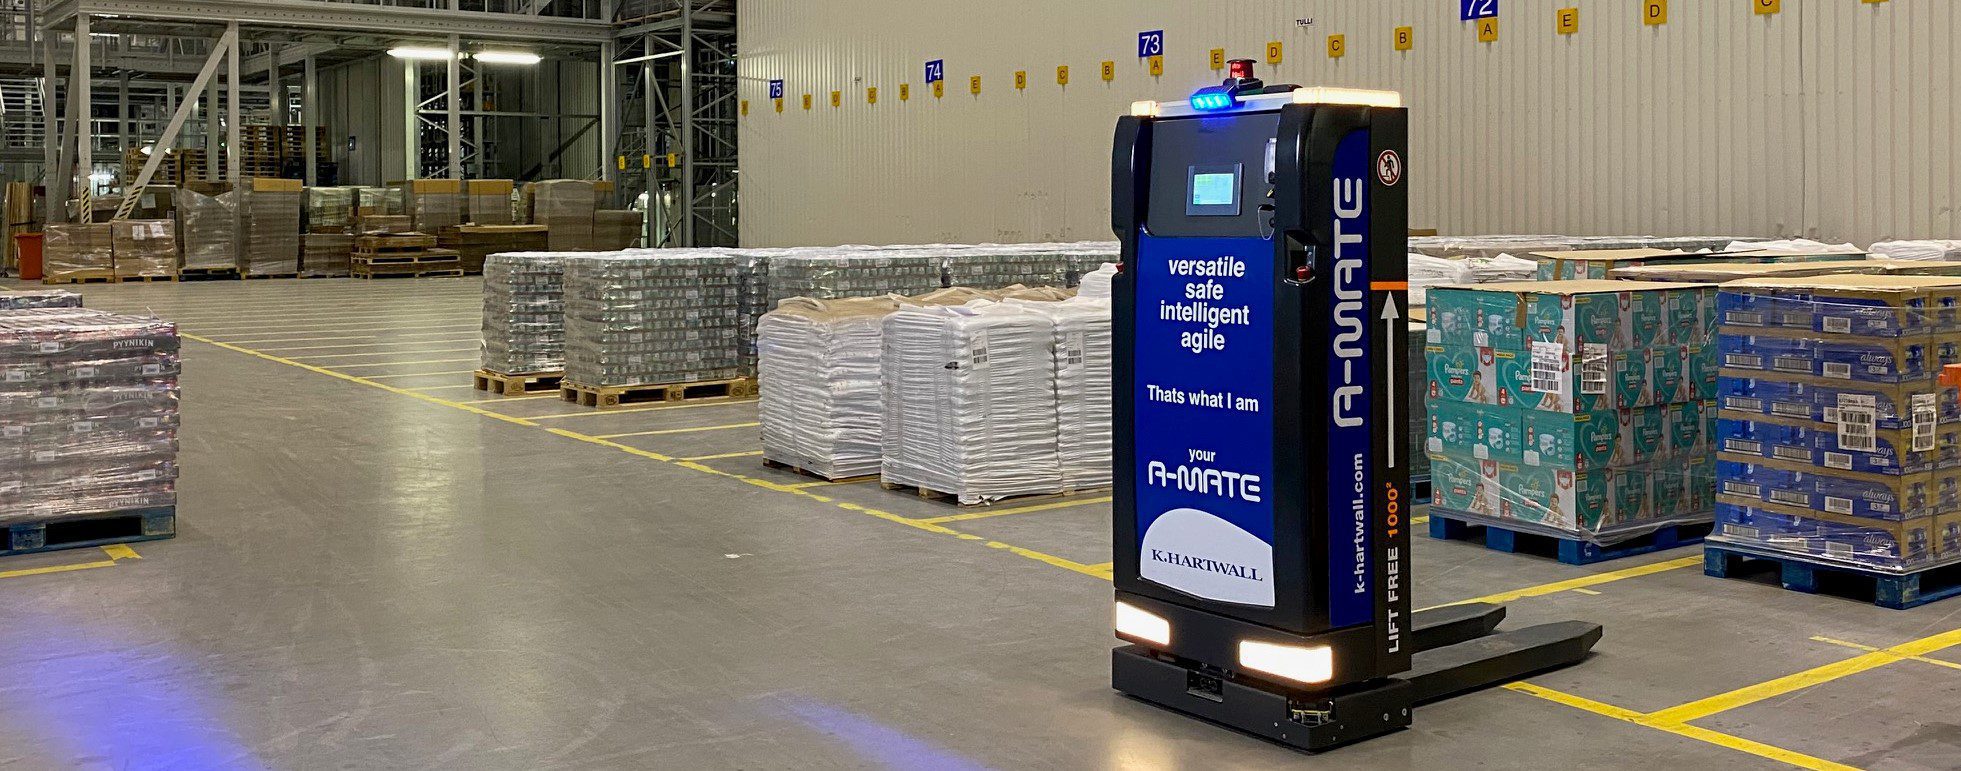 AMR A-MATE can pick pallets from the floor